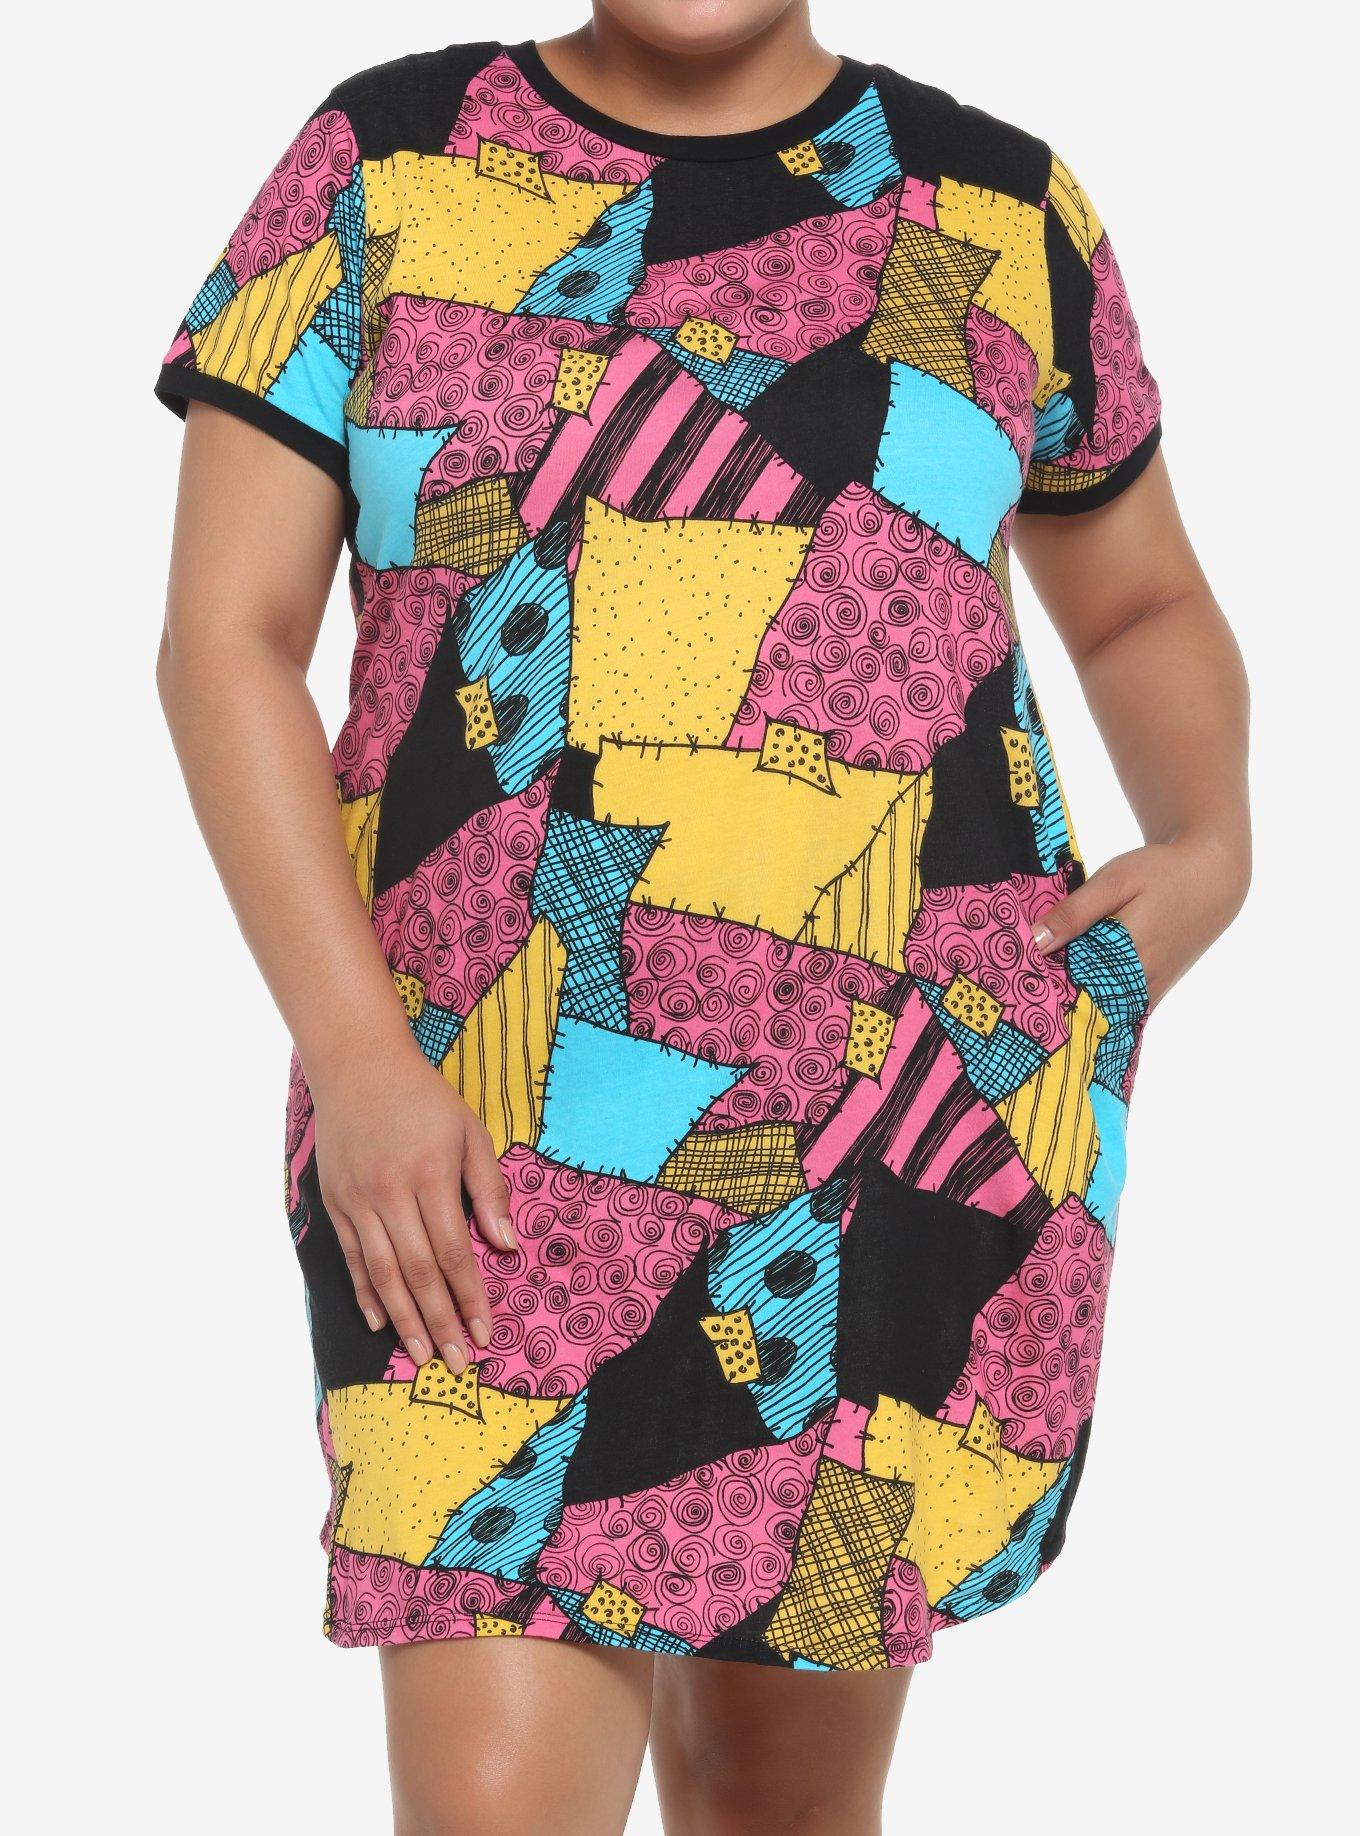 Dapper Day Outfit Ideas | Vintage Disney Dresses The Nightmare Before Christmas Sally T-Shirt Dress Plus Size $27.92 AT vintagedancer.com